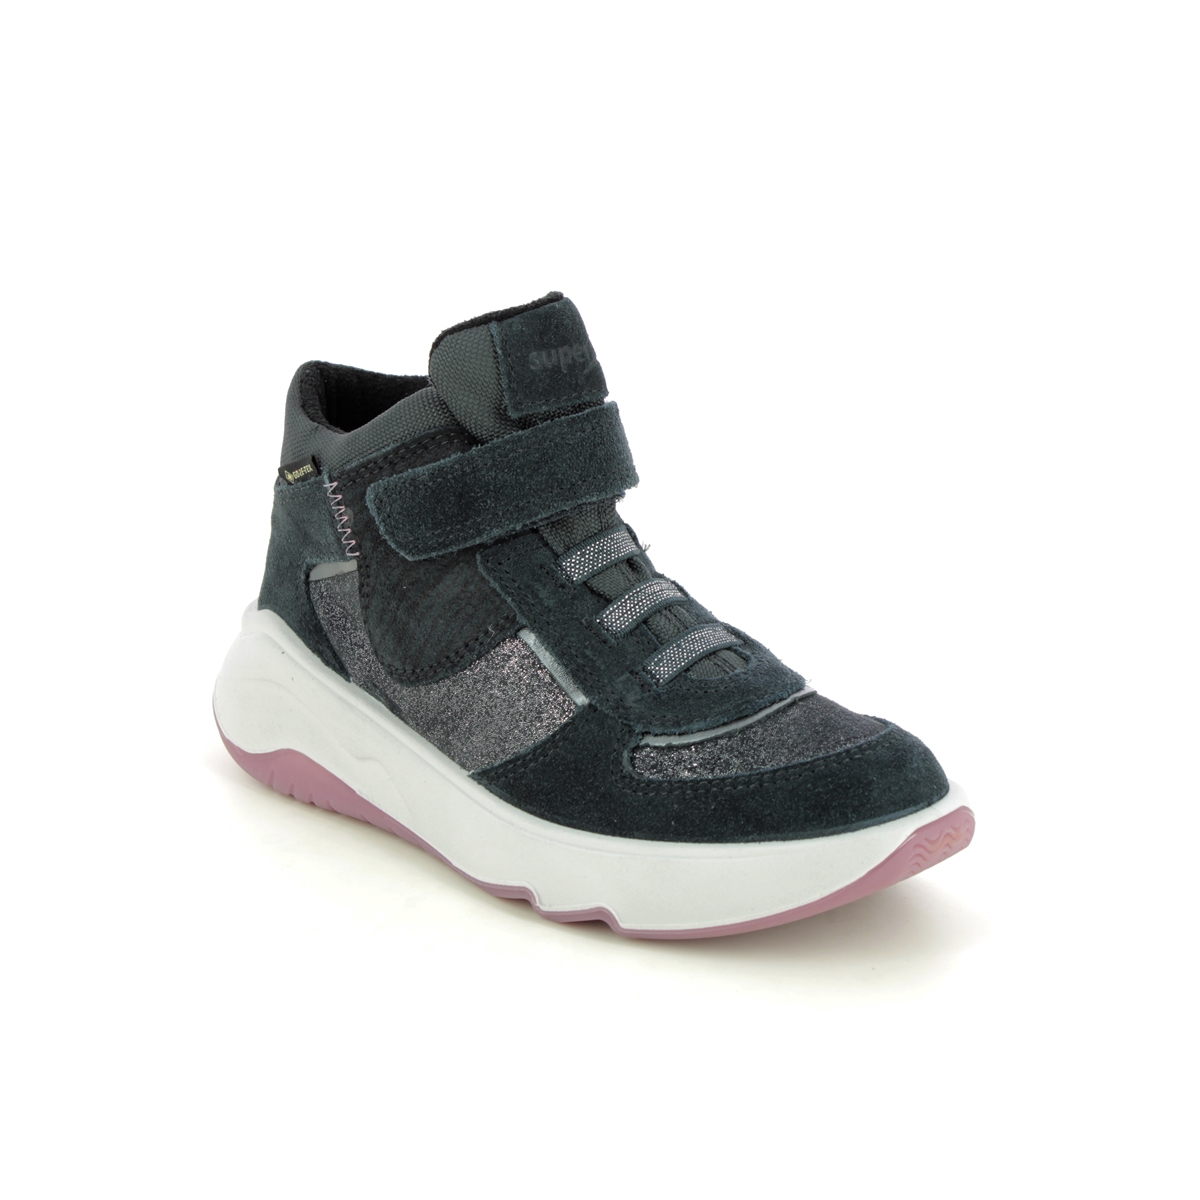 Superfit Melodie Ht Gtx Black Suede Kids Girls Trainers 1000632-2000 In Size 31 In Plain Black Suede For kids